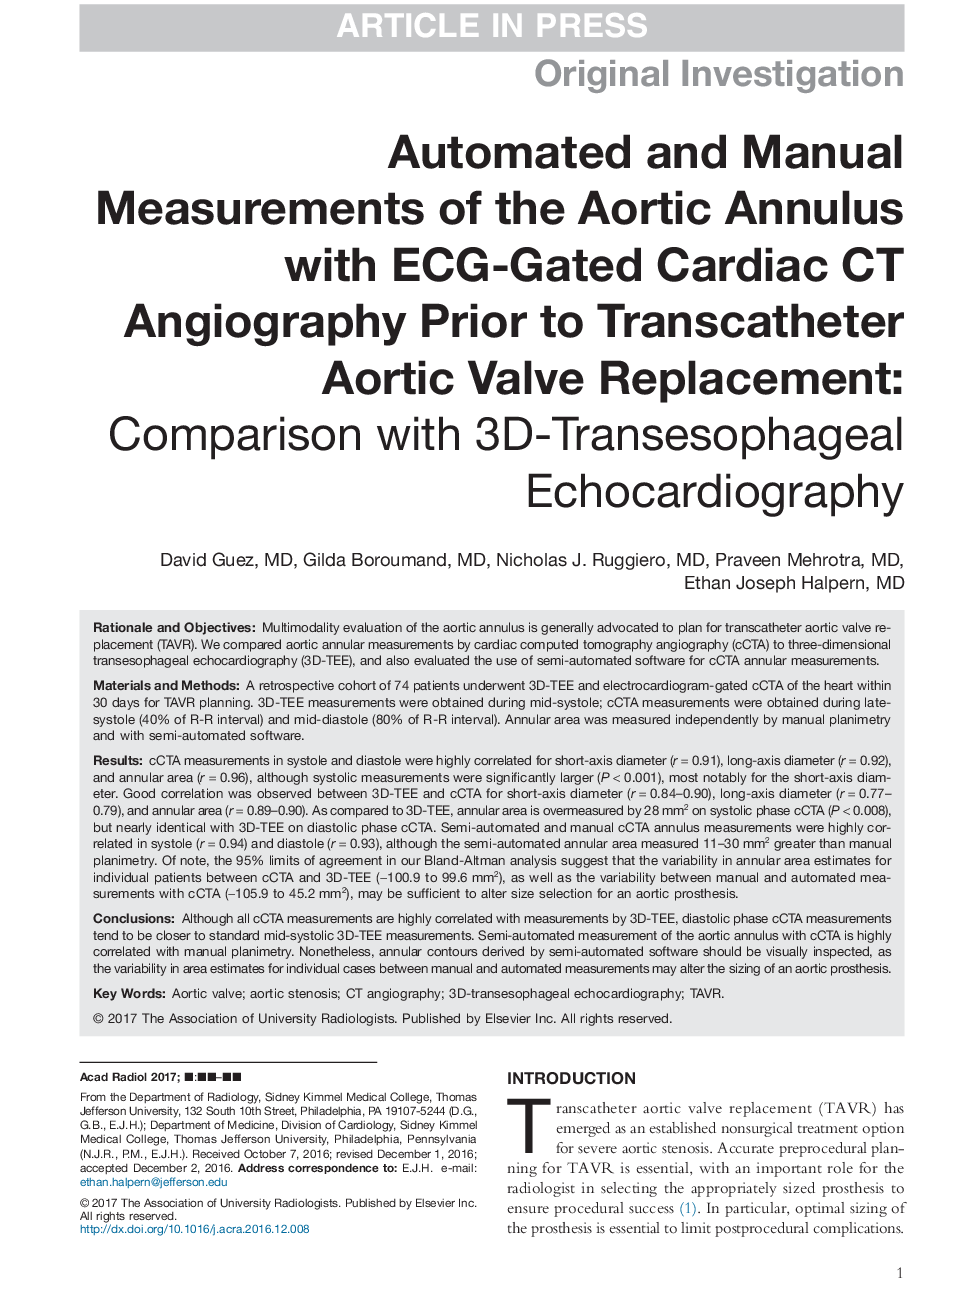 Automated and Manual Measurements of the Aortic Annulus with ECG-Gated Cardiac CT Angiography Prior to Transcatheter Aortic Valve Replacement